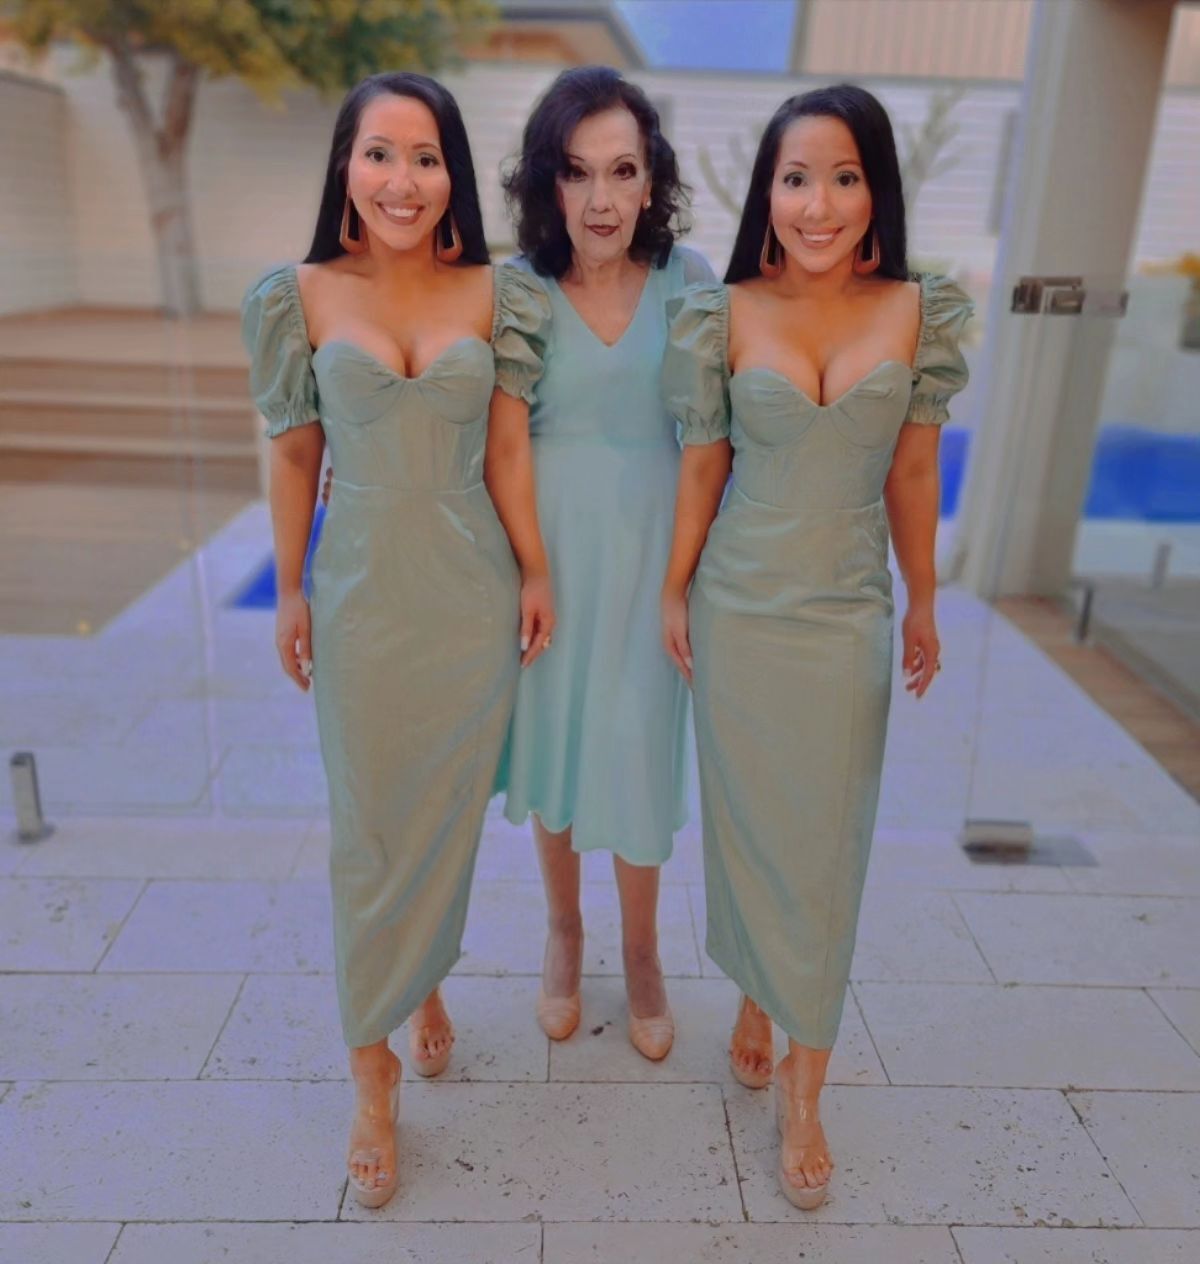 The ''most identical twins in the world'' who married the same man showed their mother. Photo